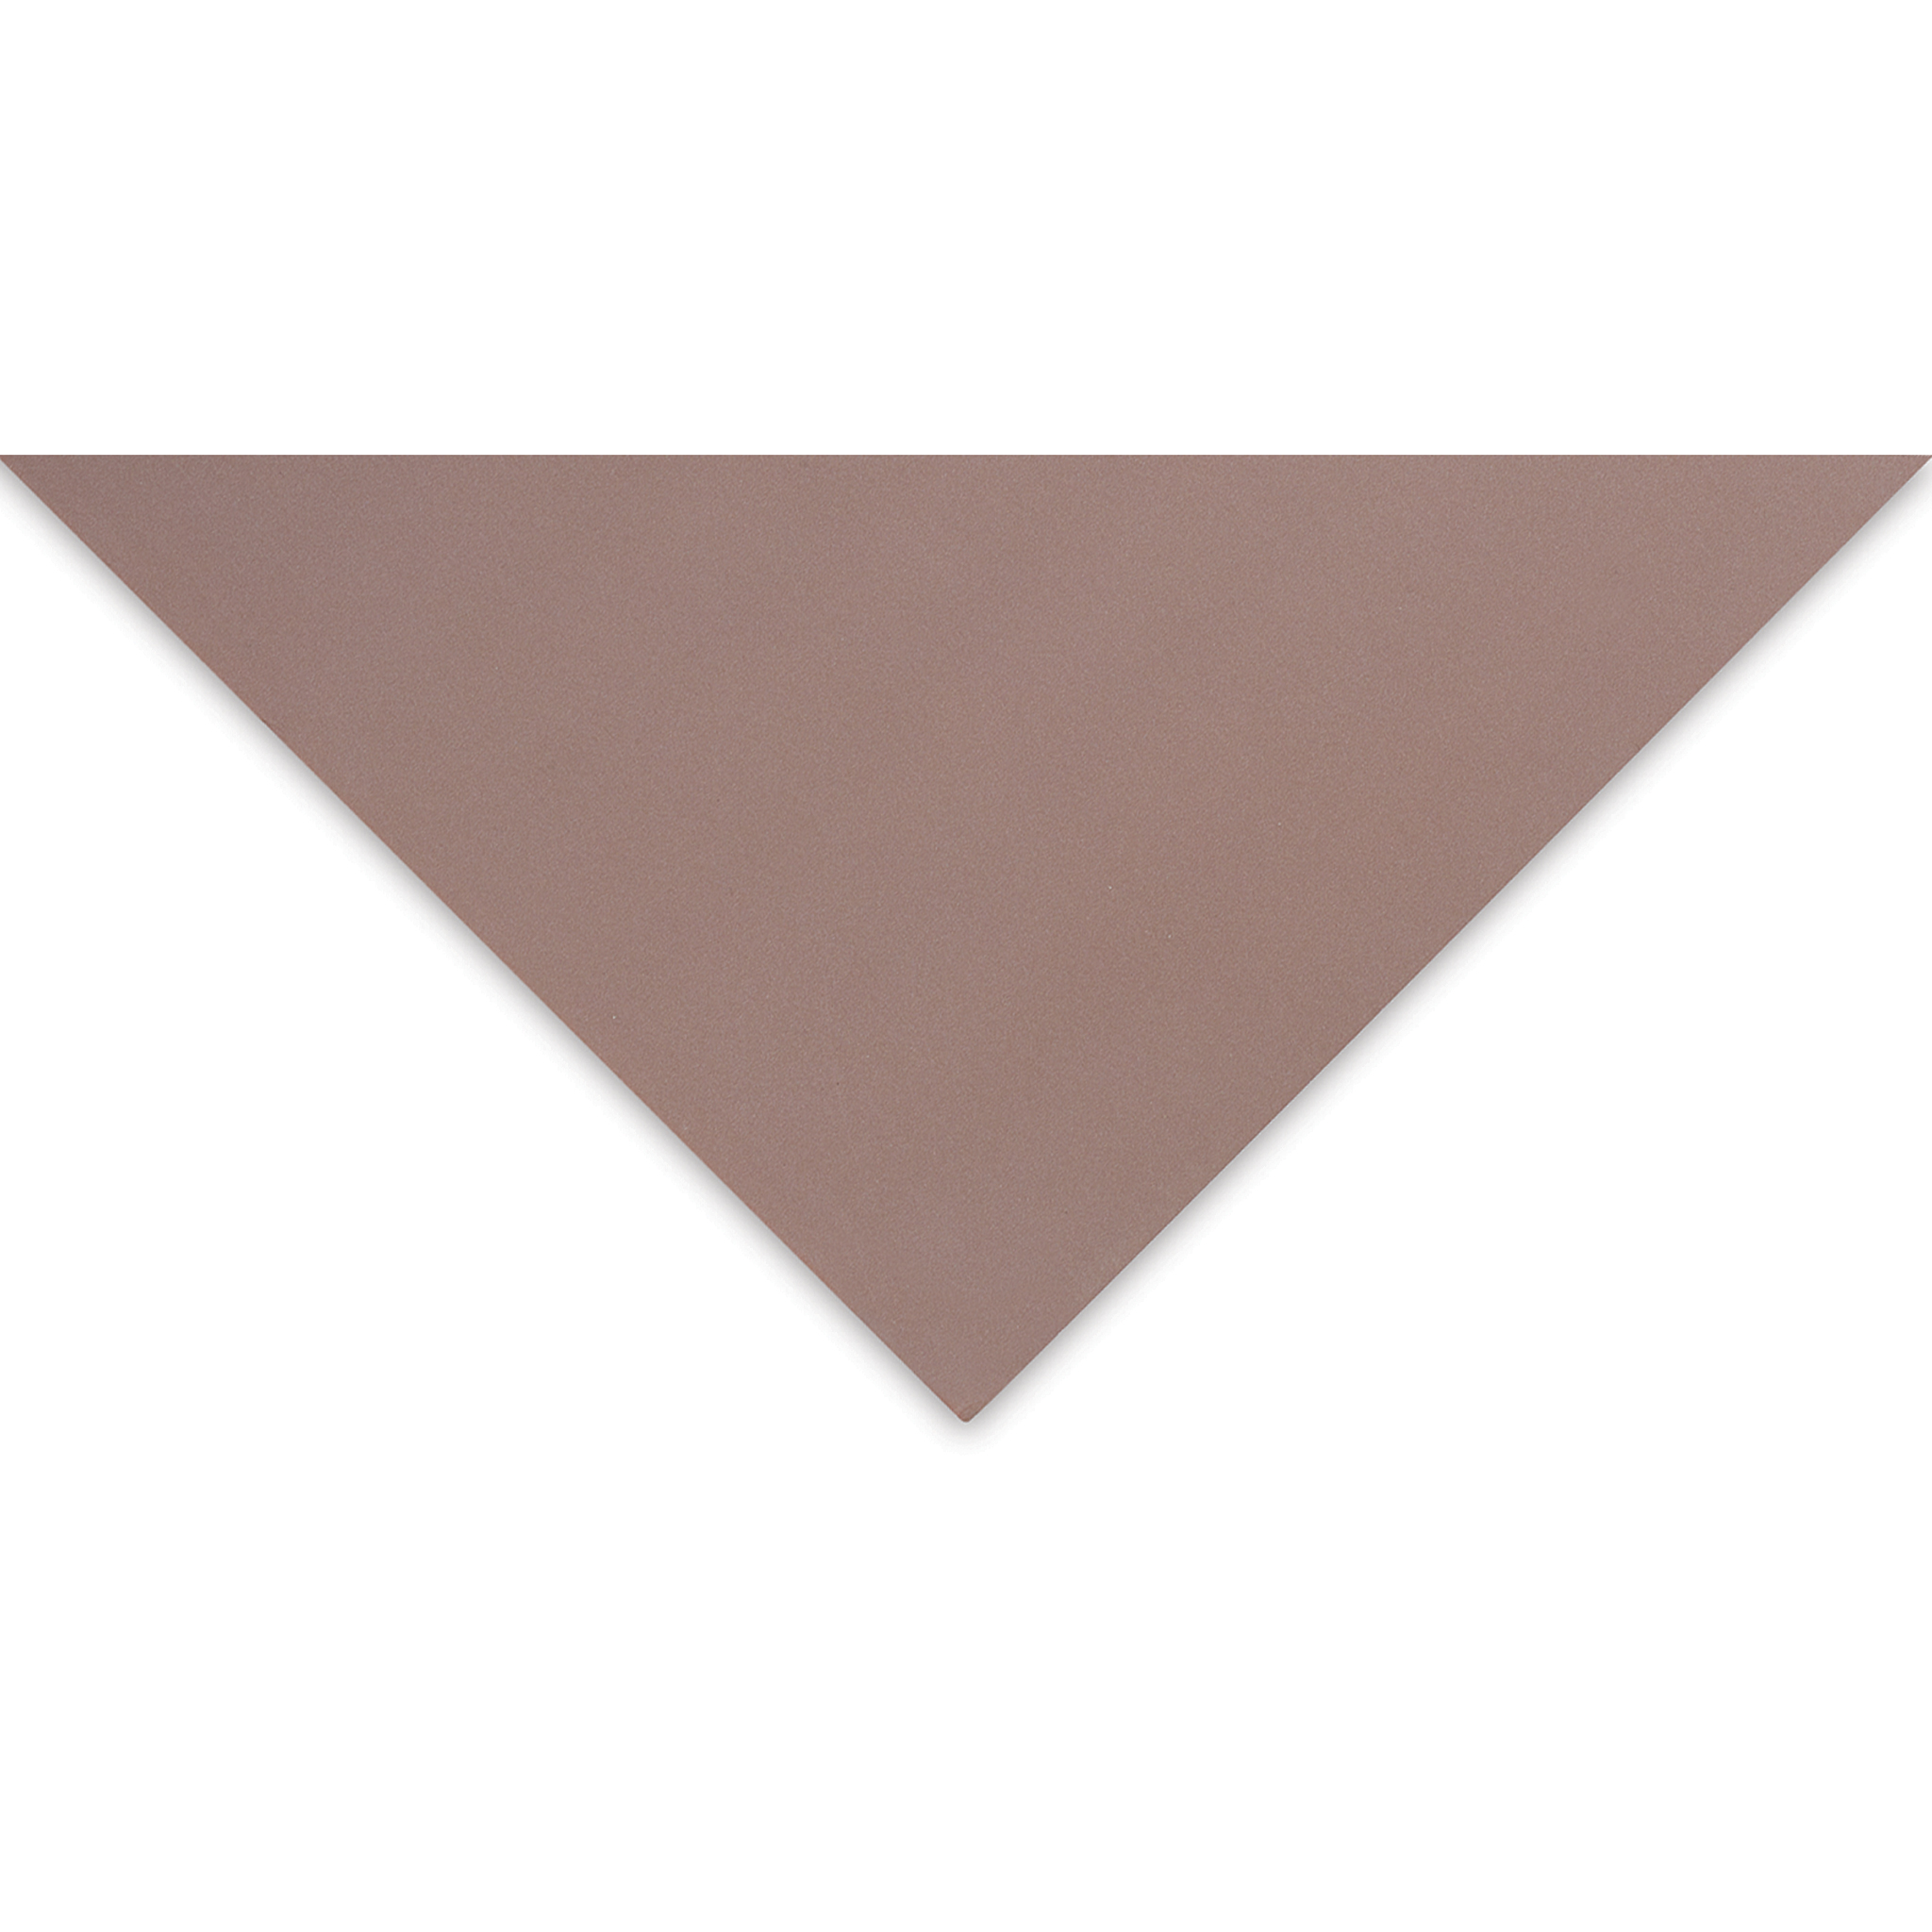 Clairefontaine Pastelmat Mounted Board - Sienna 19.5 x 27.5 in (50x70cm)